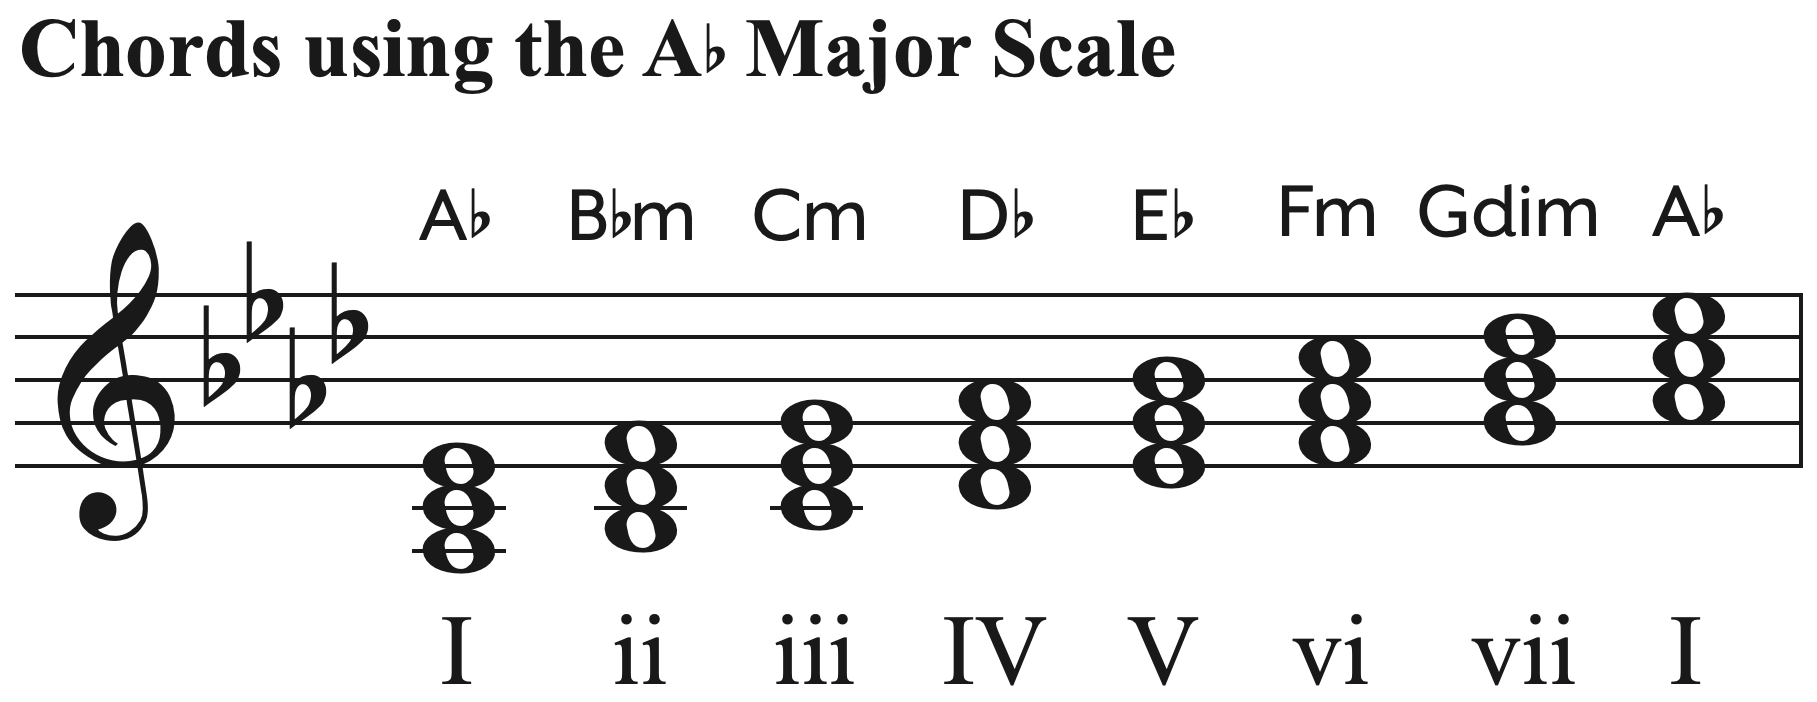 Chords using the A-flat major scale